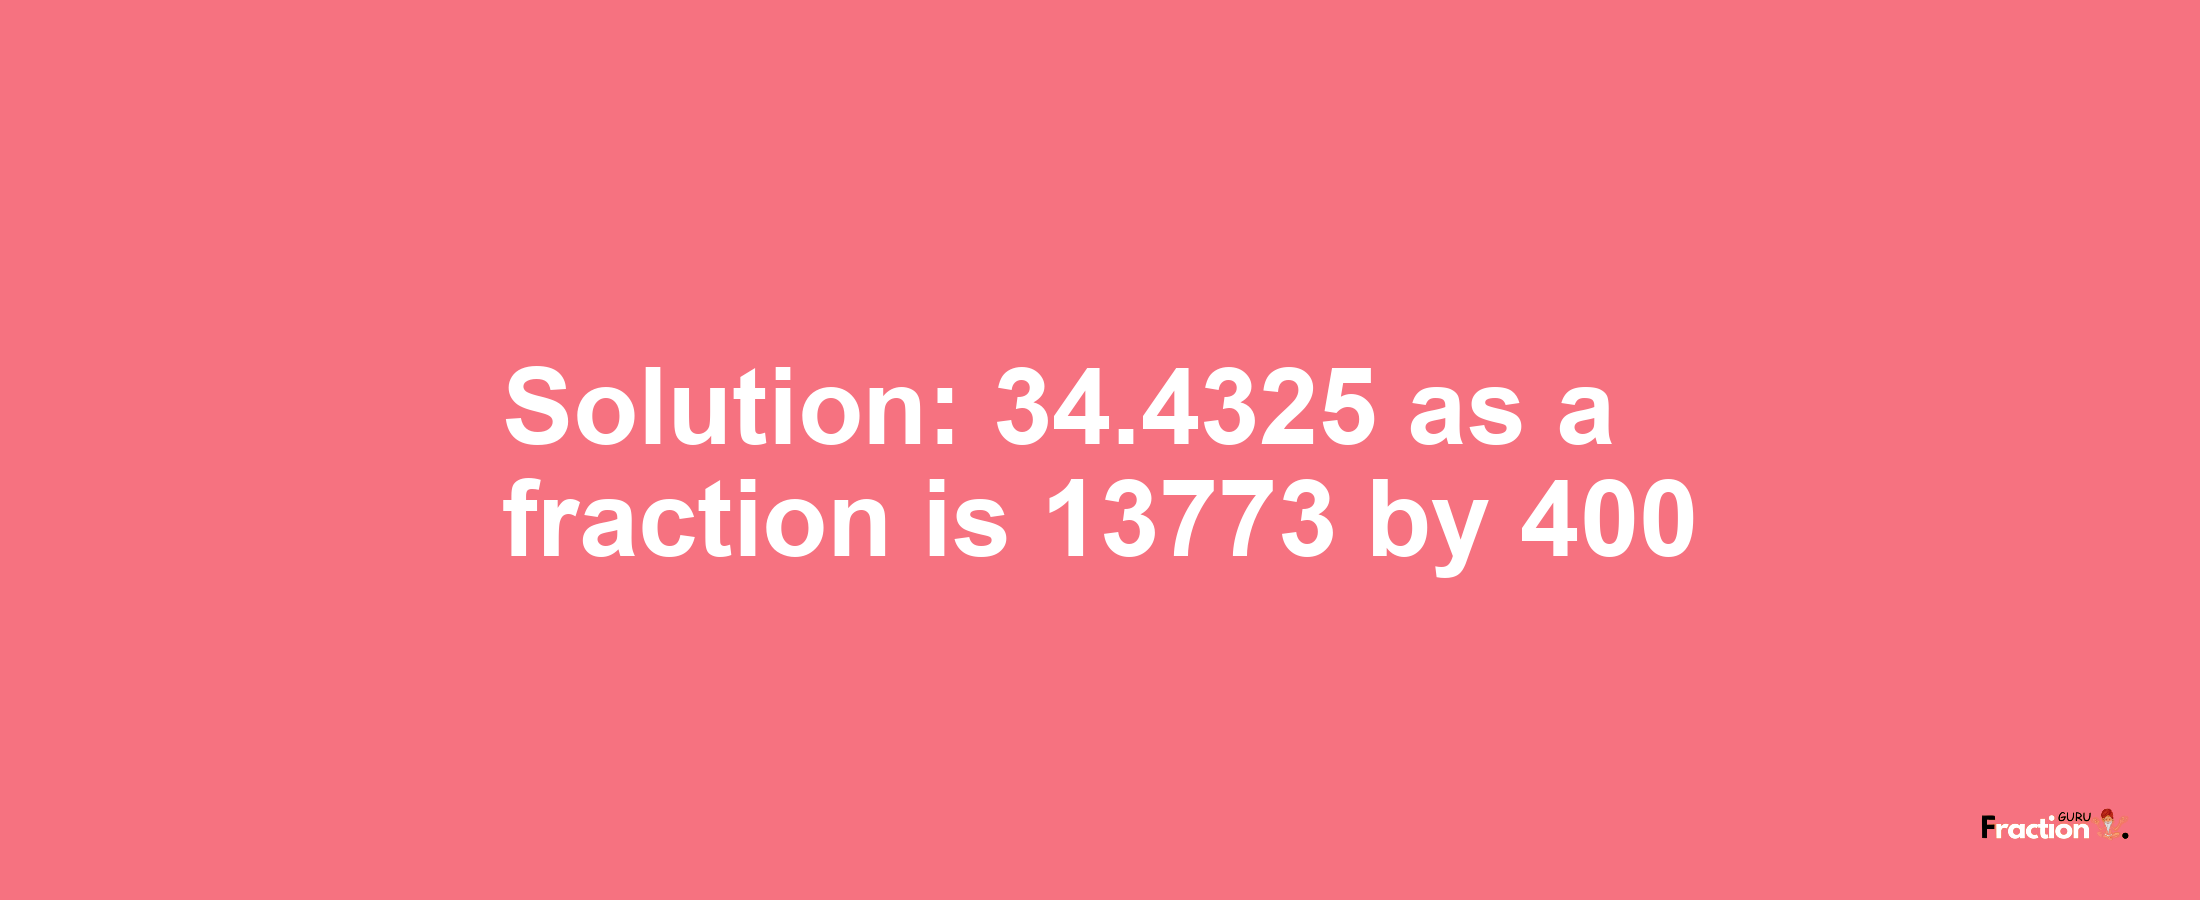 Solution:34.4325 as a fraction is 13773/400